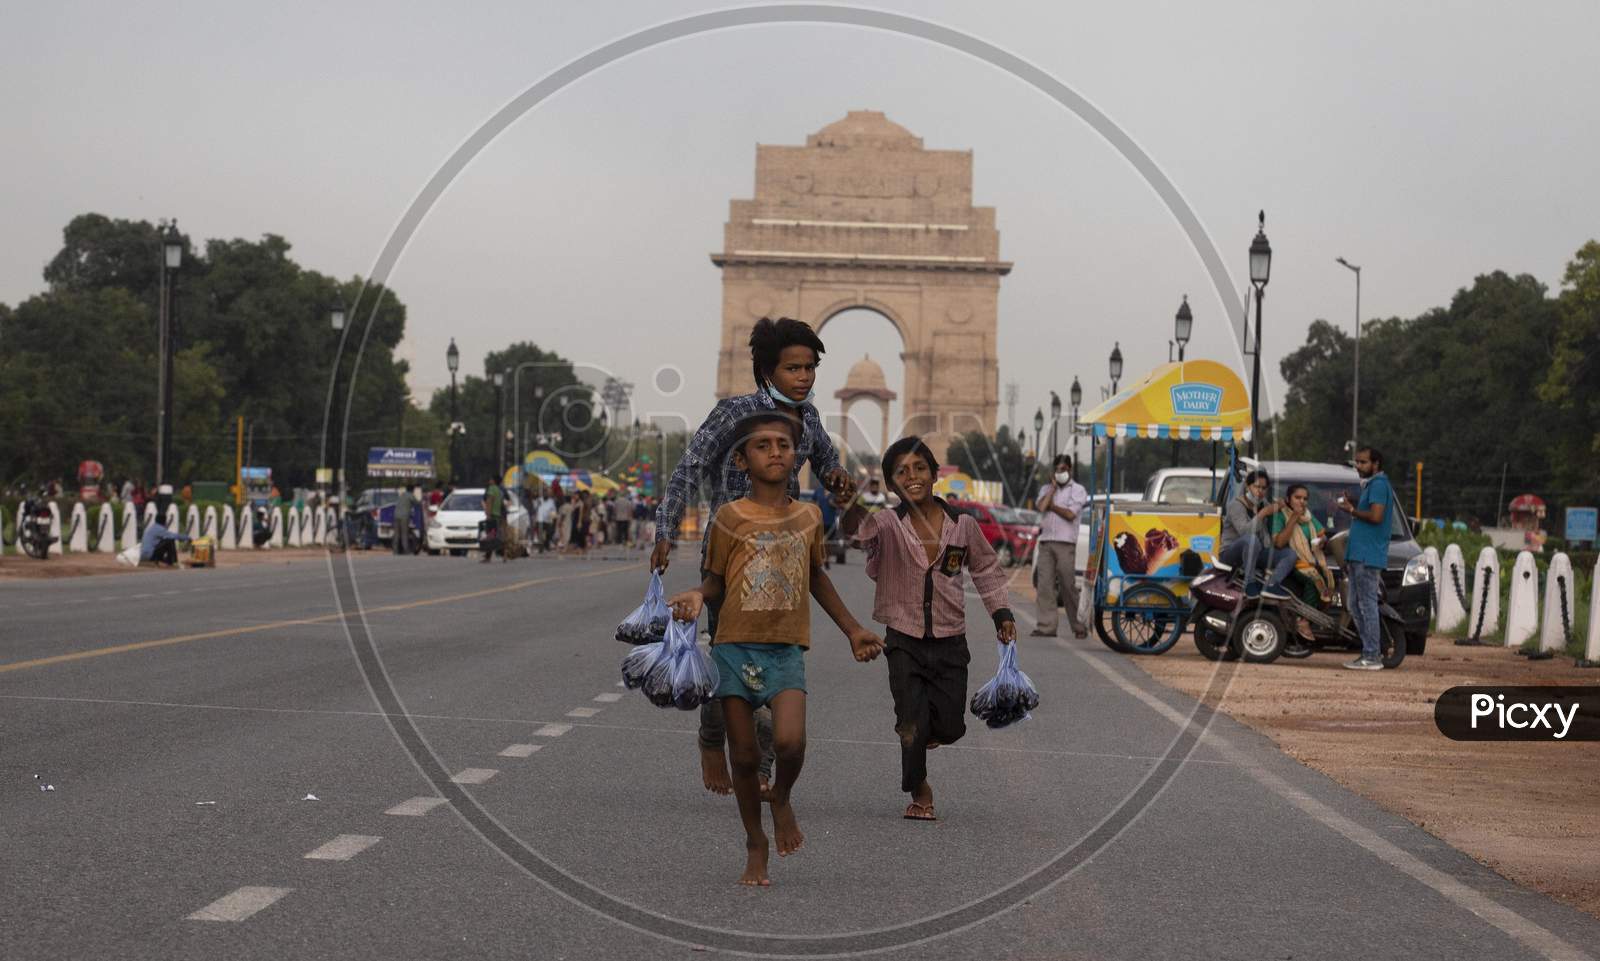 Children Run To Sell Indian Blue Berries At India Gate, Rajpath, On  July 22, 2020 In New Delhi, India.